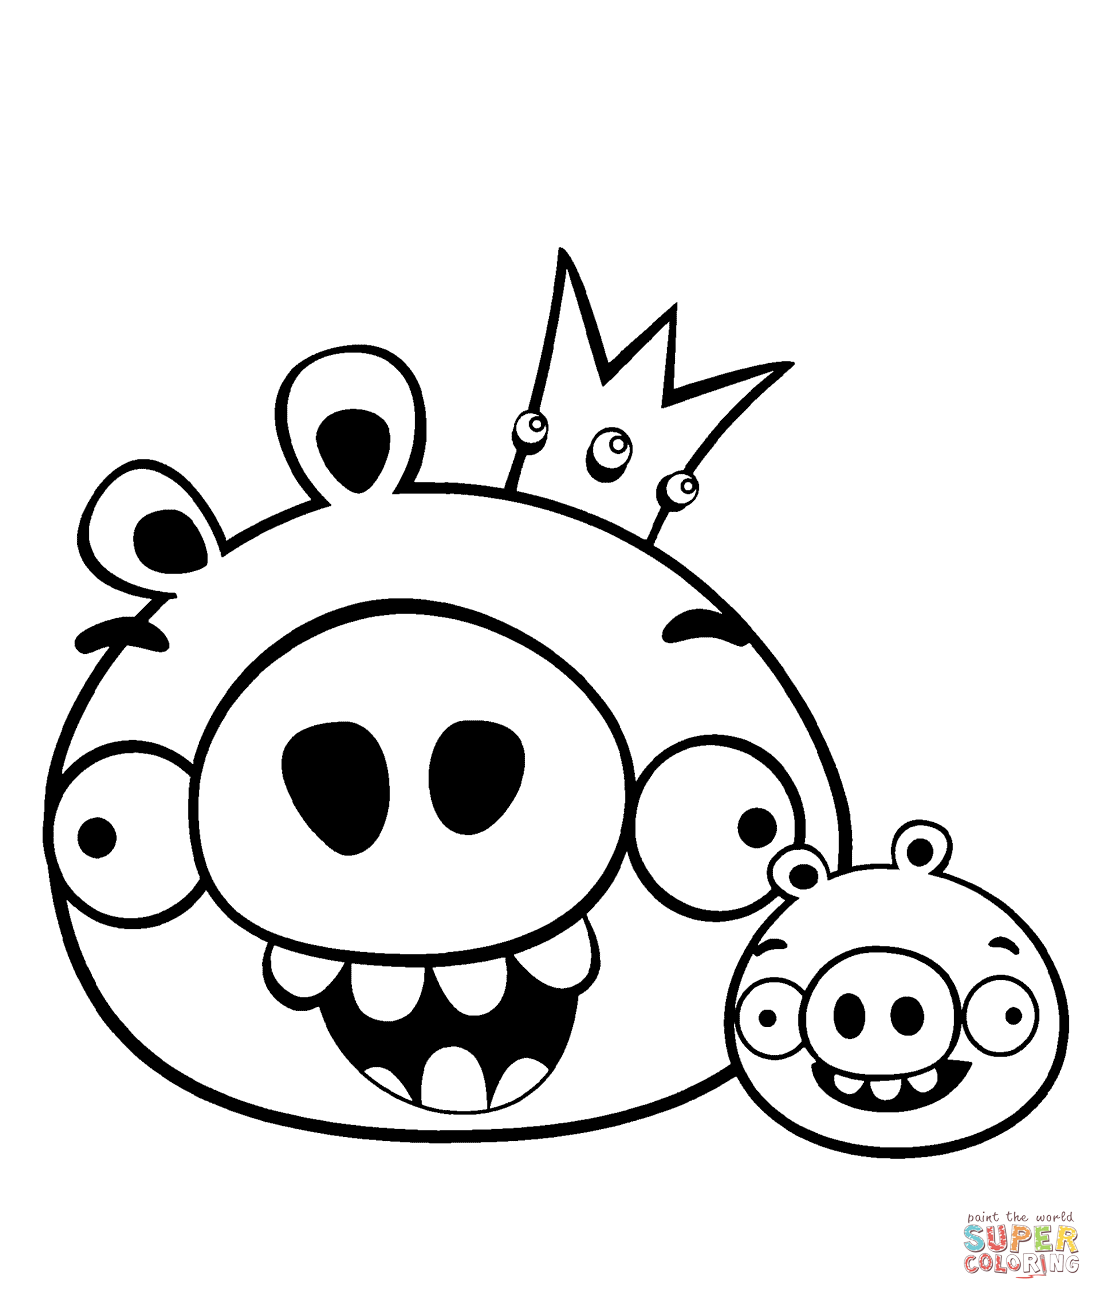 King pig and minion coloring page free printable coloring pages